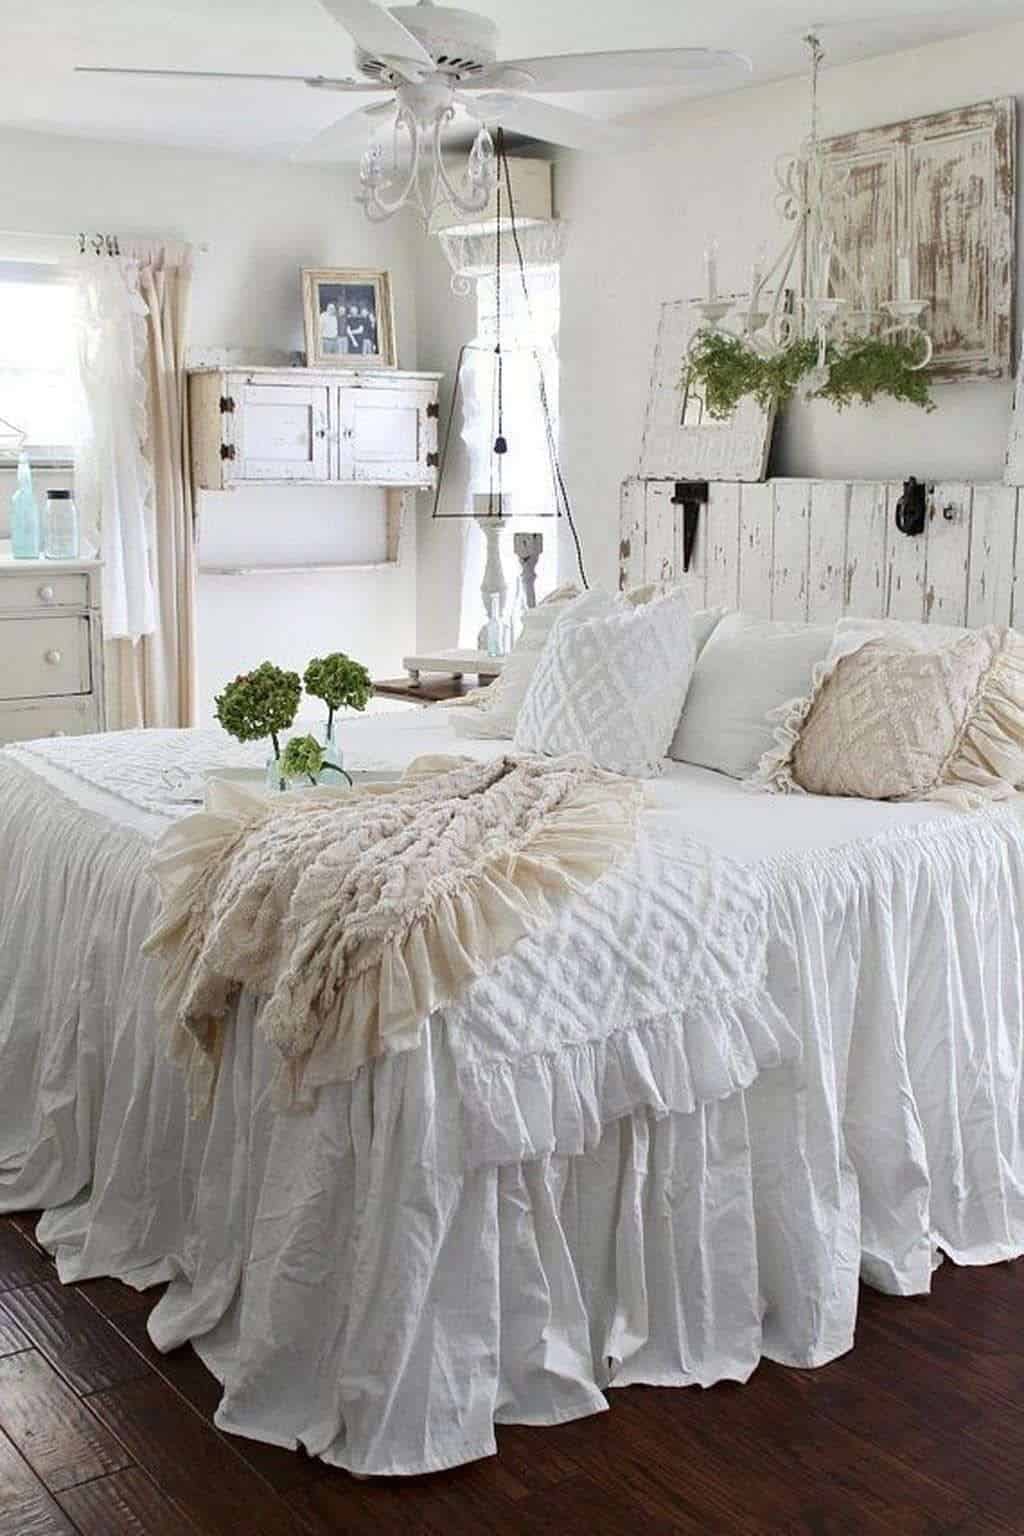 23 Most Beautiful Shabby Chic Bedroom Ideas - Country Style Bedroom Decorating Ideas